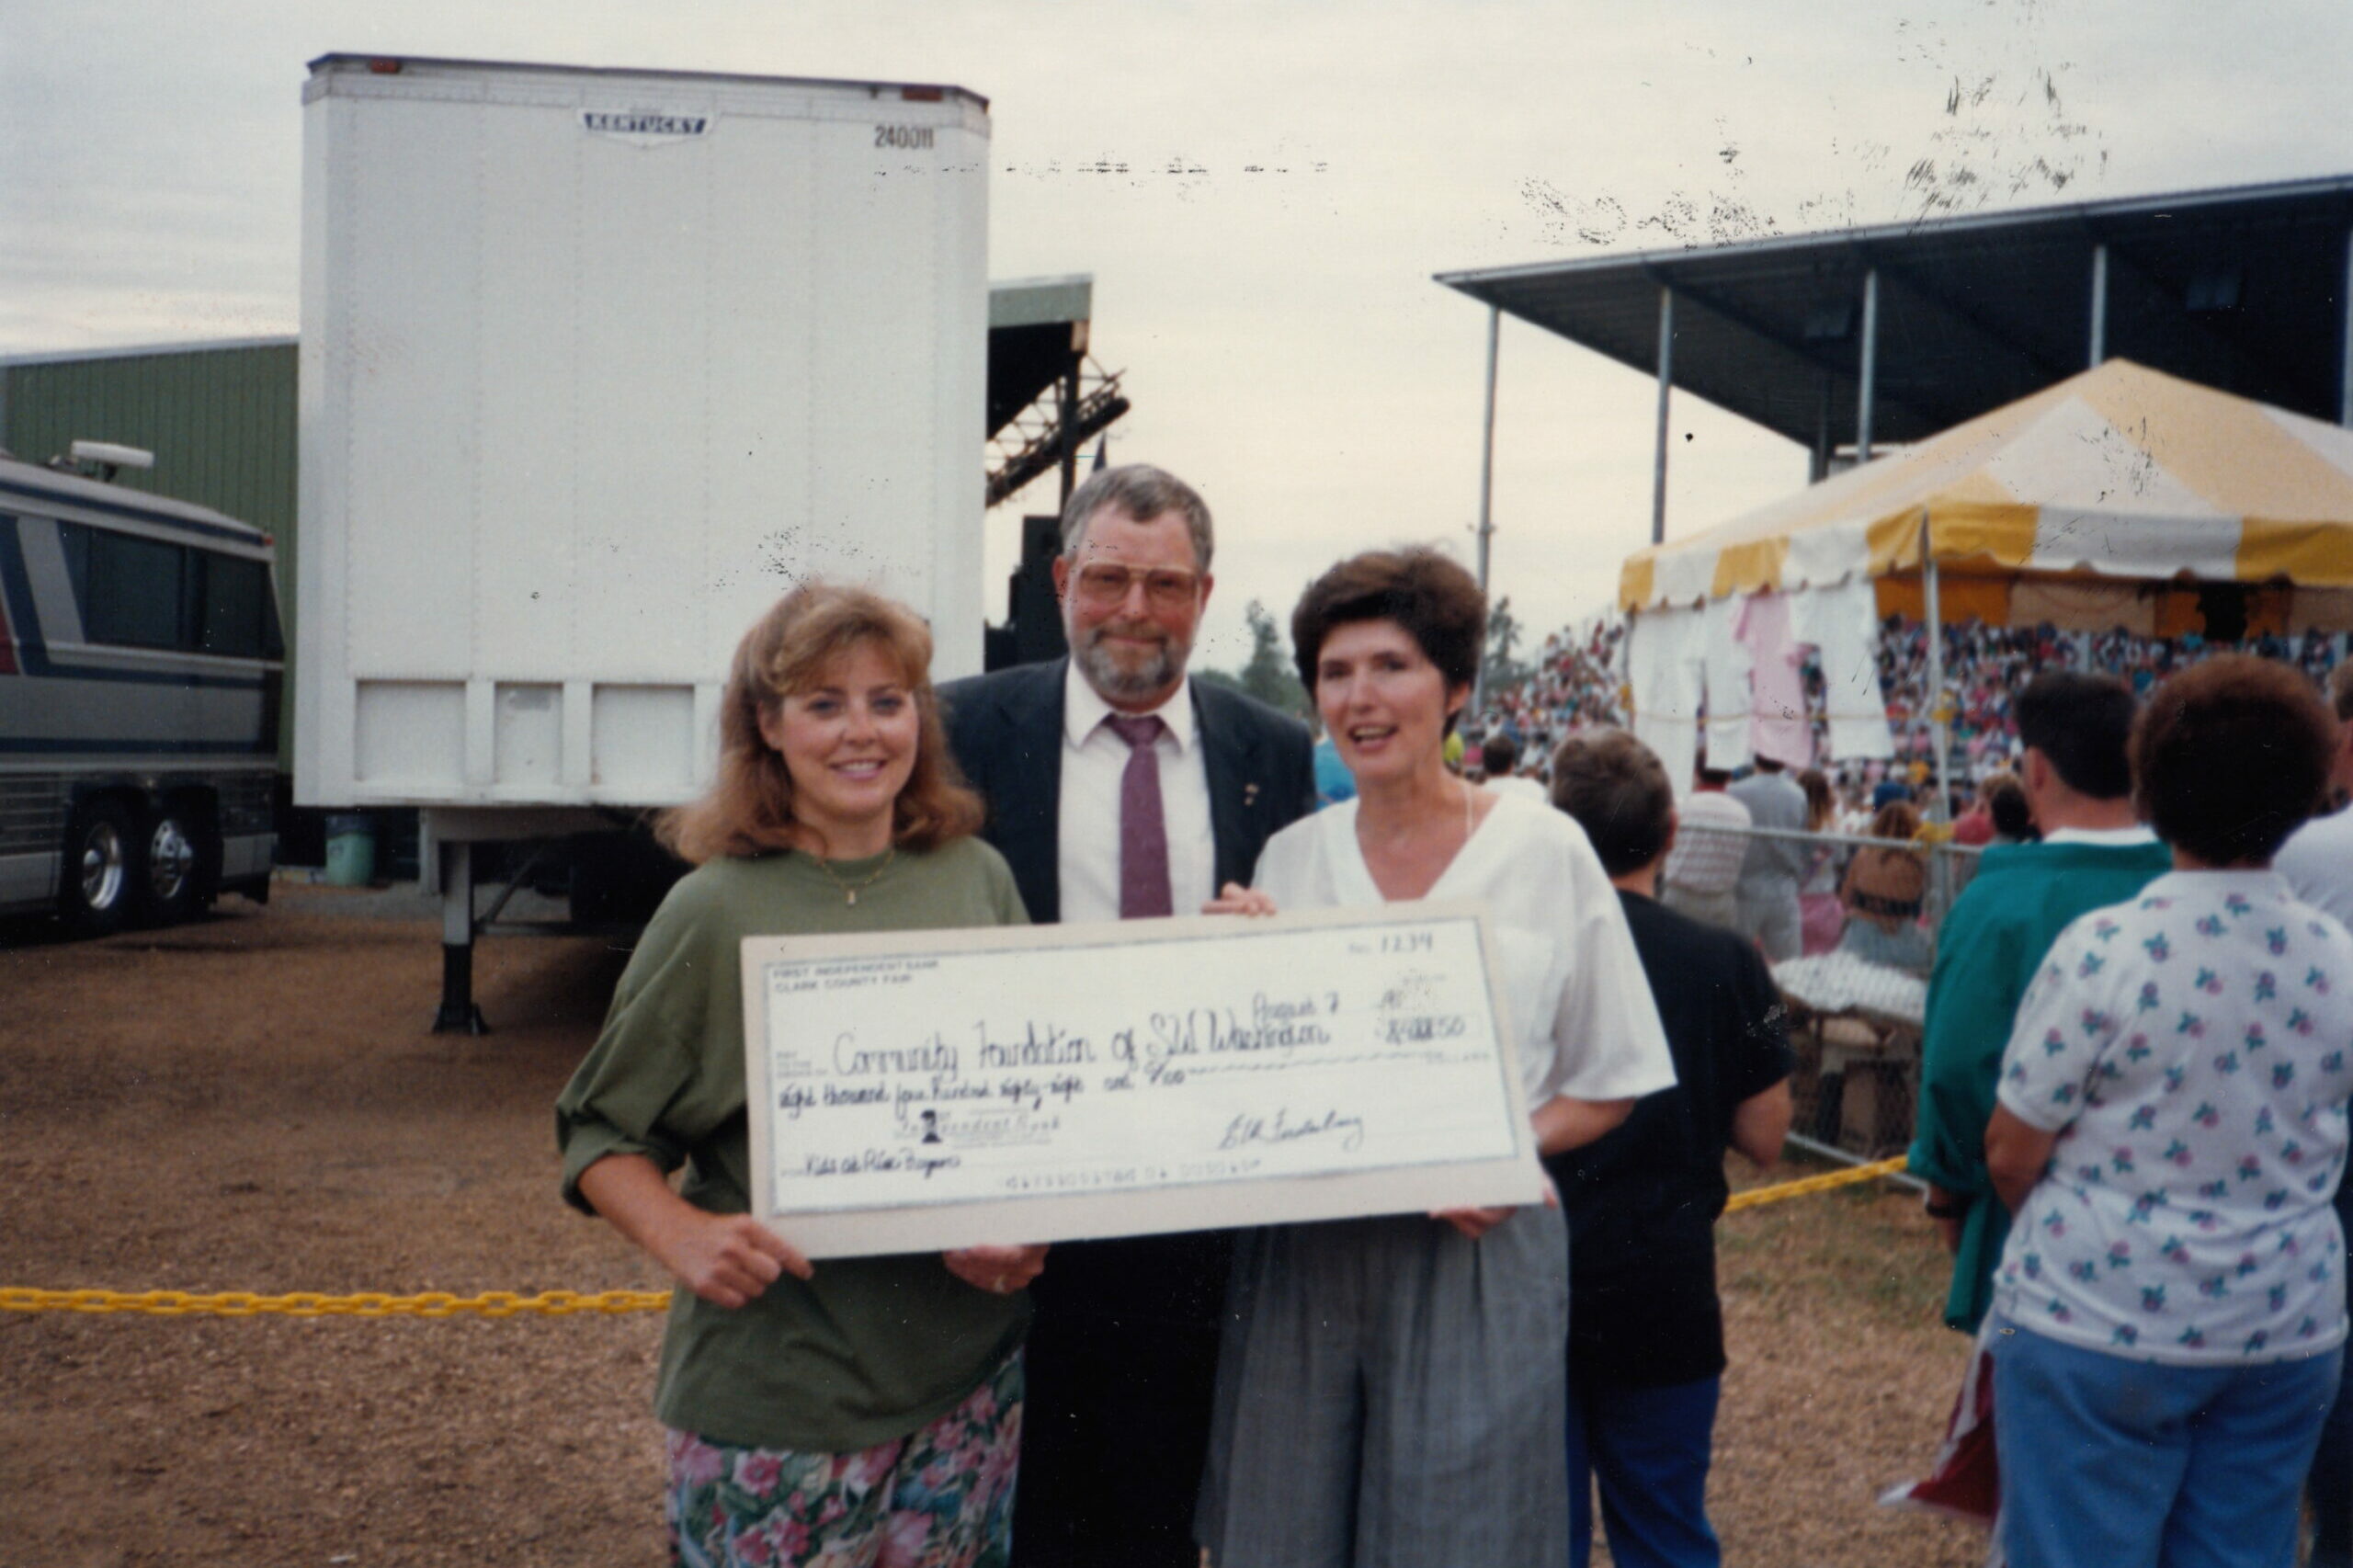 A large check being presented with a smile.